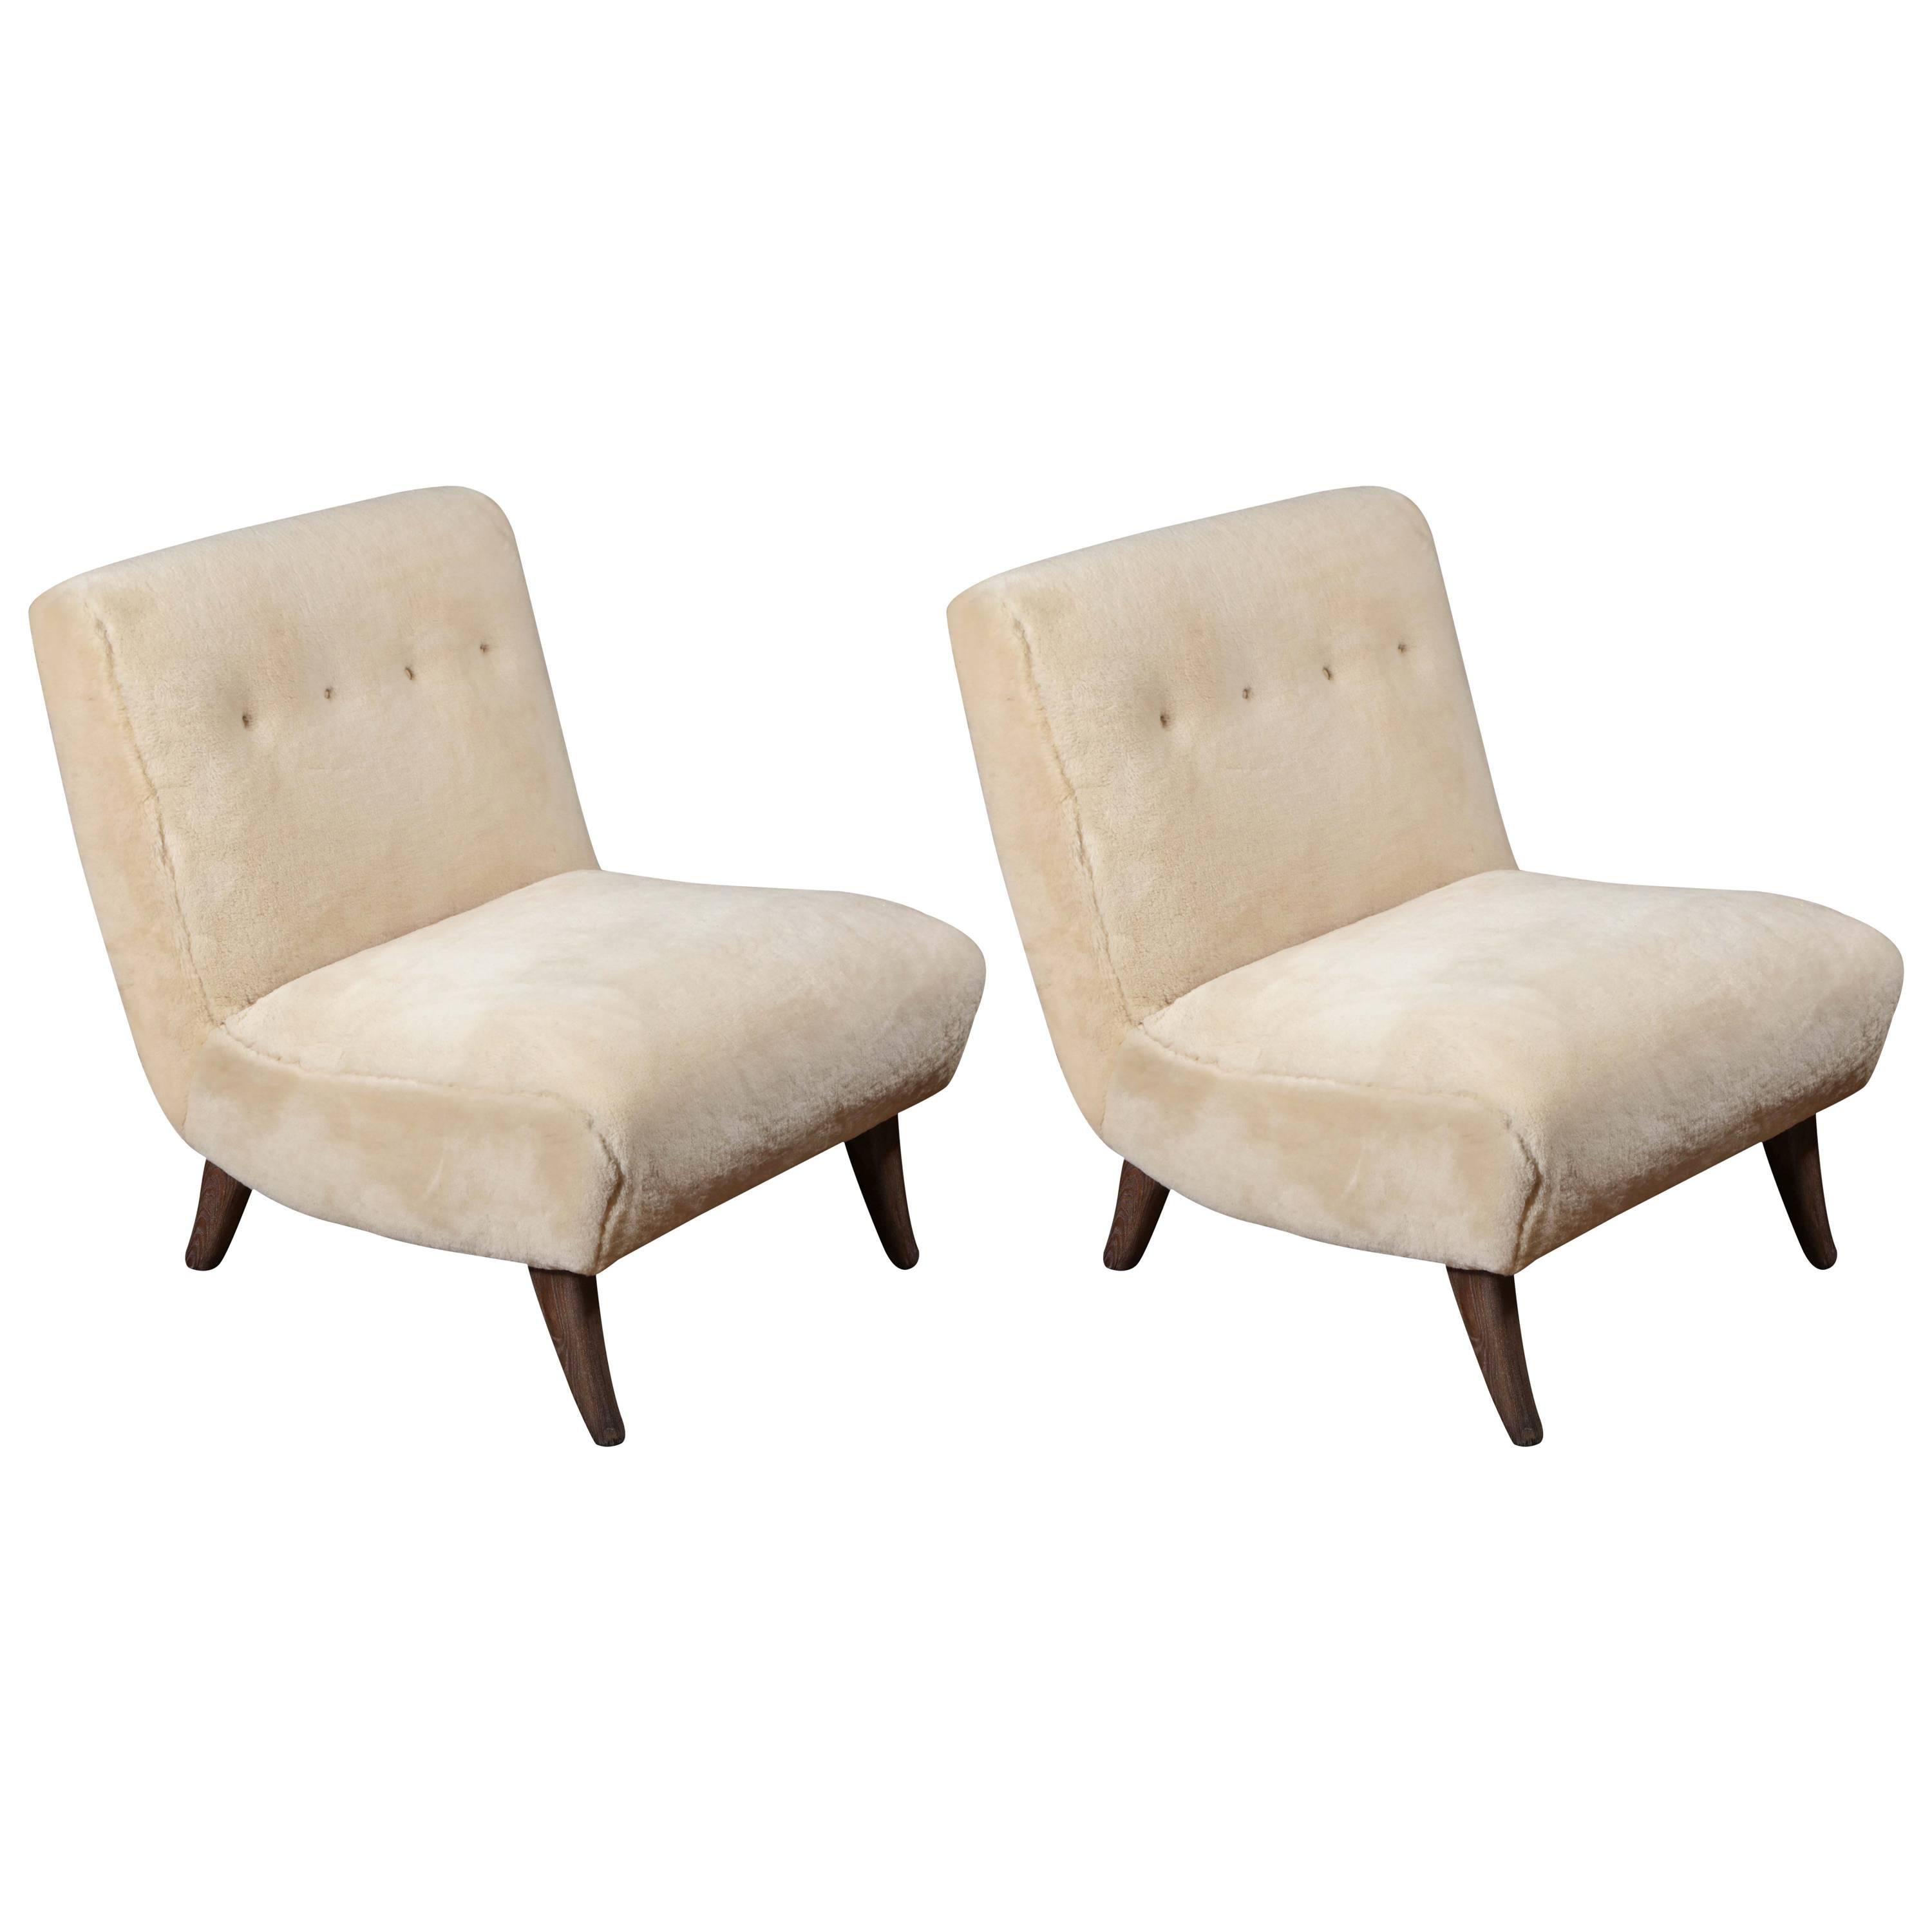 Pair of Shearling Slipper Chairs